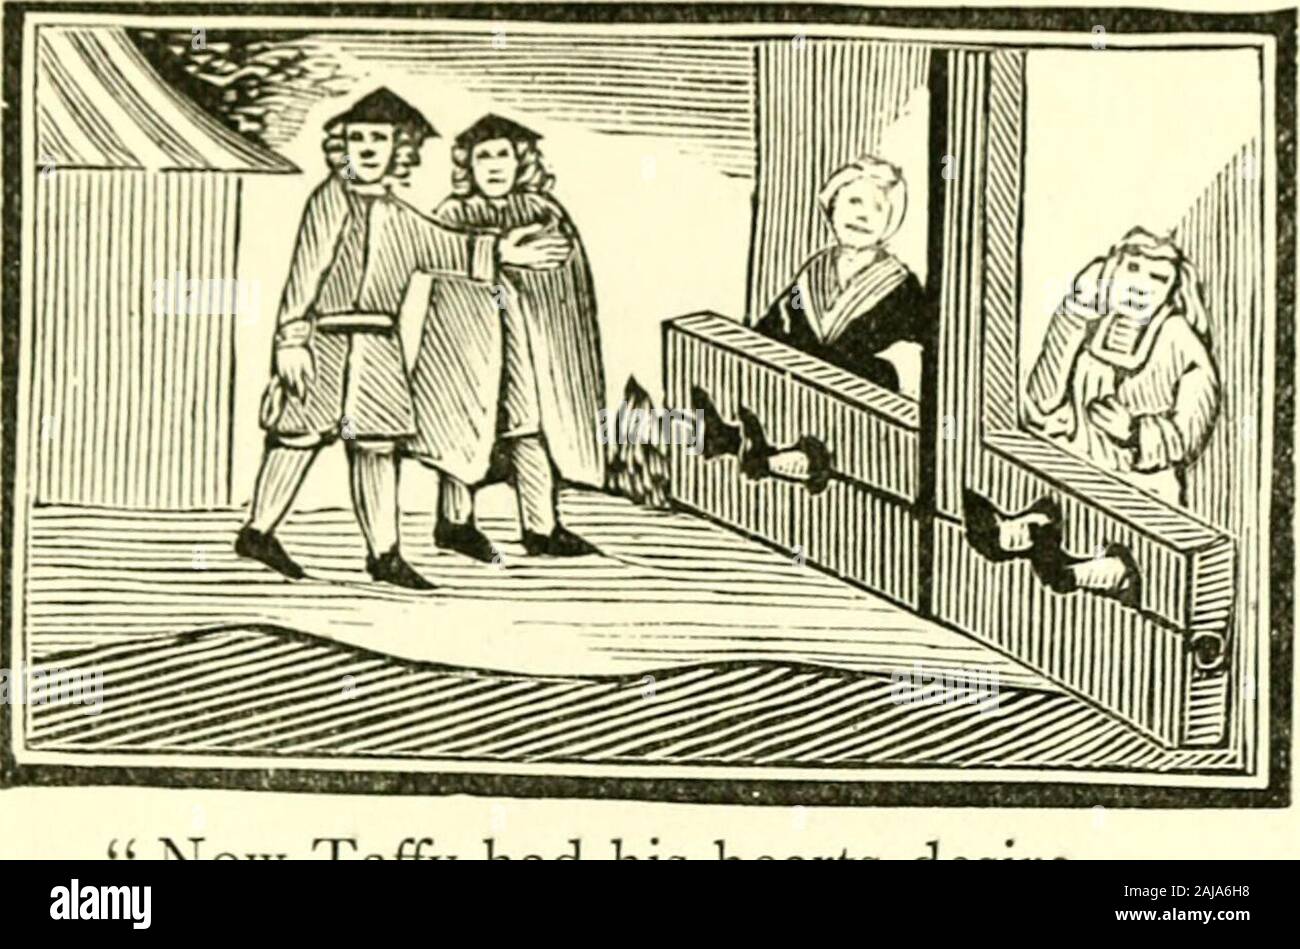 Rund Deqenereret syreindhold Chap-books of the eighteenth century . He pelted hur with large huge  stonesAnd hur did apples cast;The stones did so benumb her ponesThat down  hur come at last, He fled, and lying